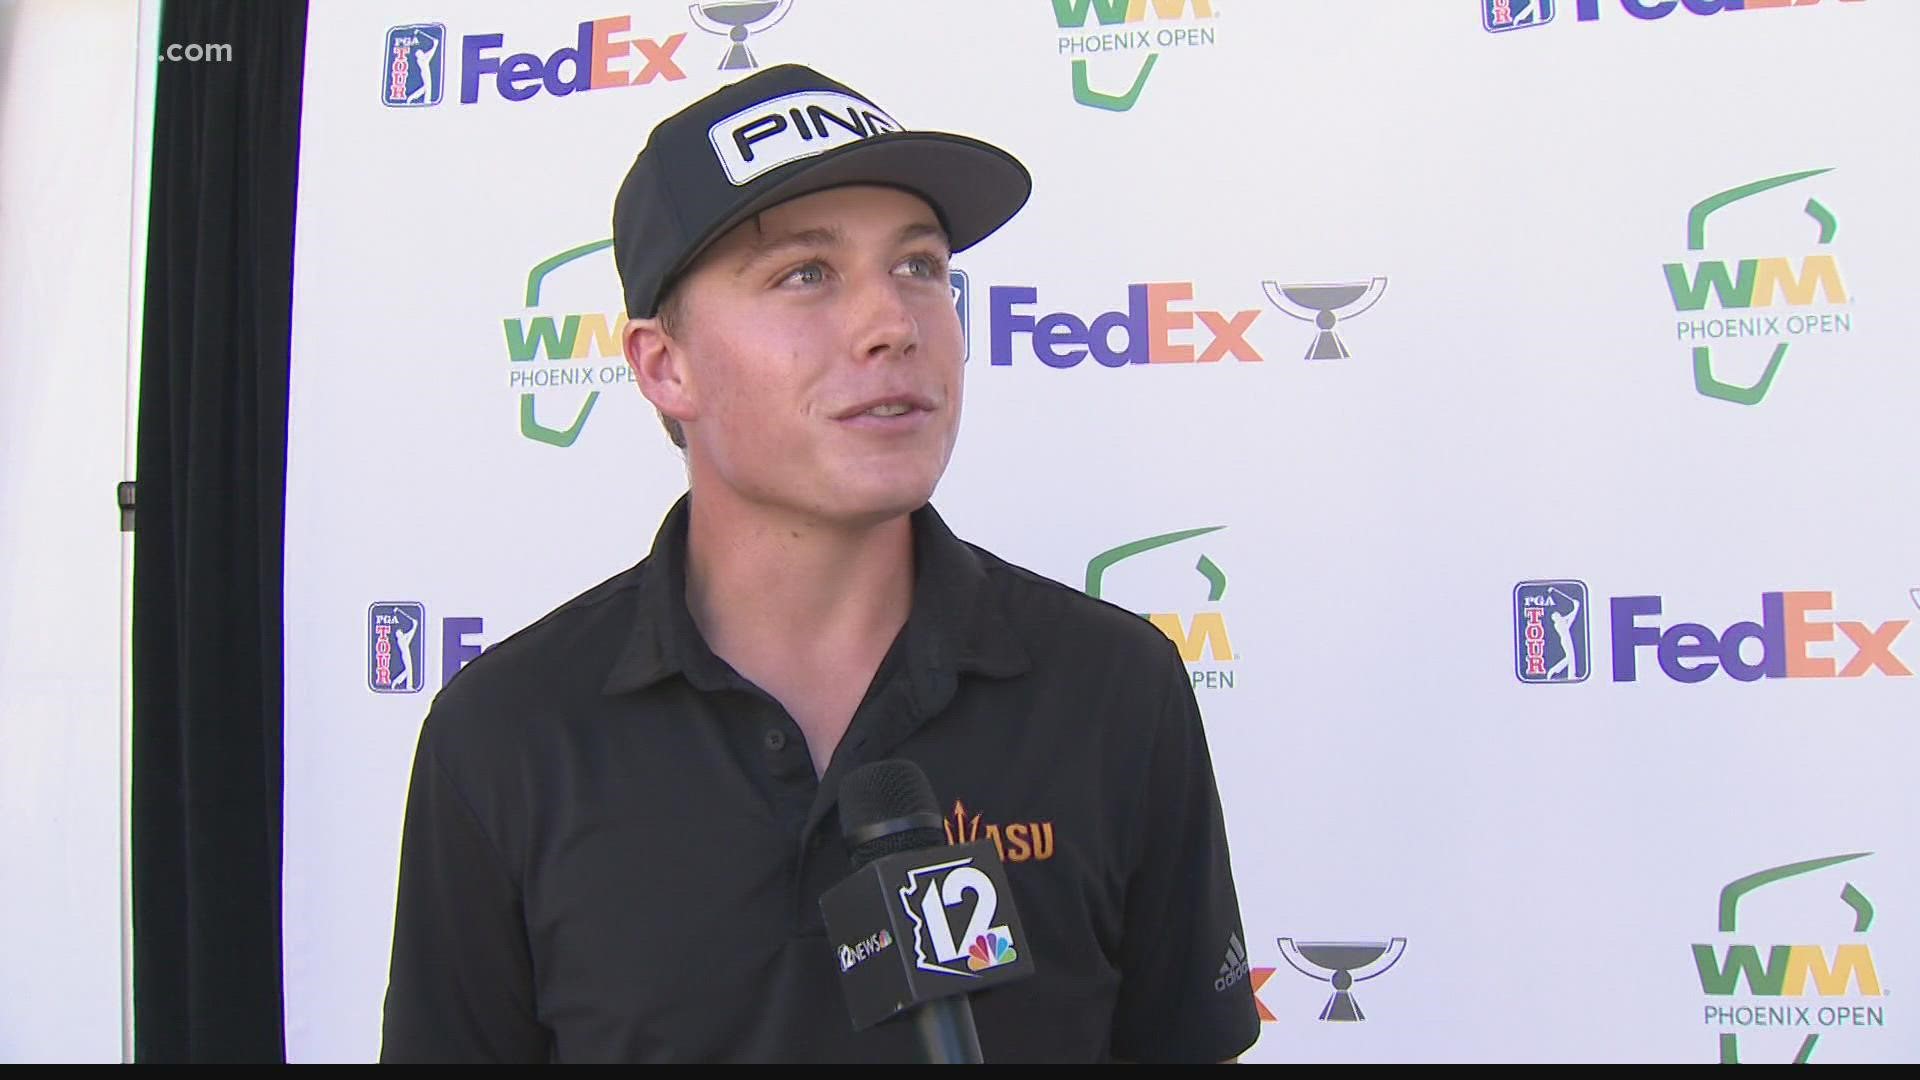 Keep an eye out for ASU freshman Preston Summerhays at the WM Phoenix Open. He's ready to follow in the footsteps of ASU greats Phil Mickelson and Jon Rahm.